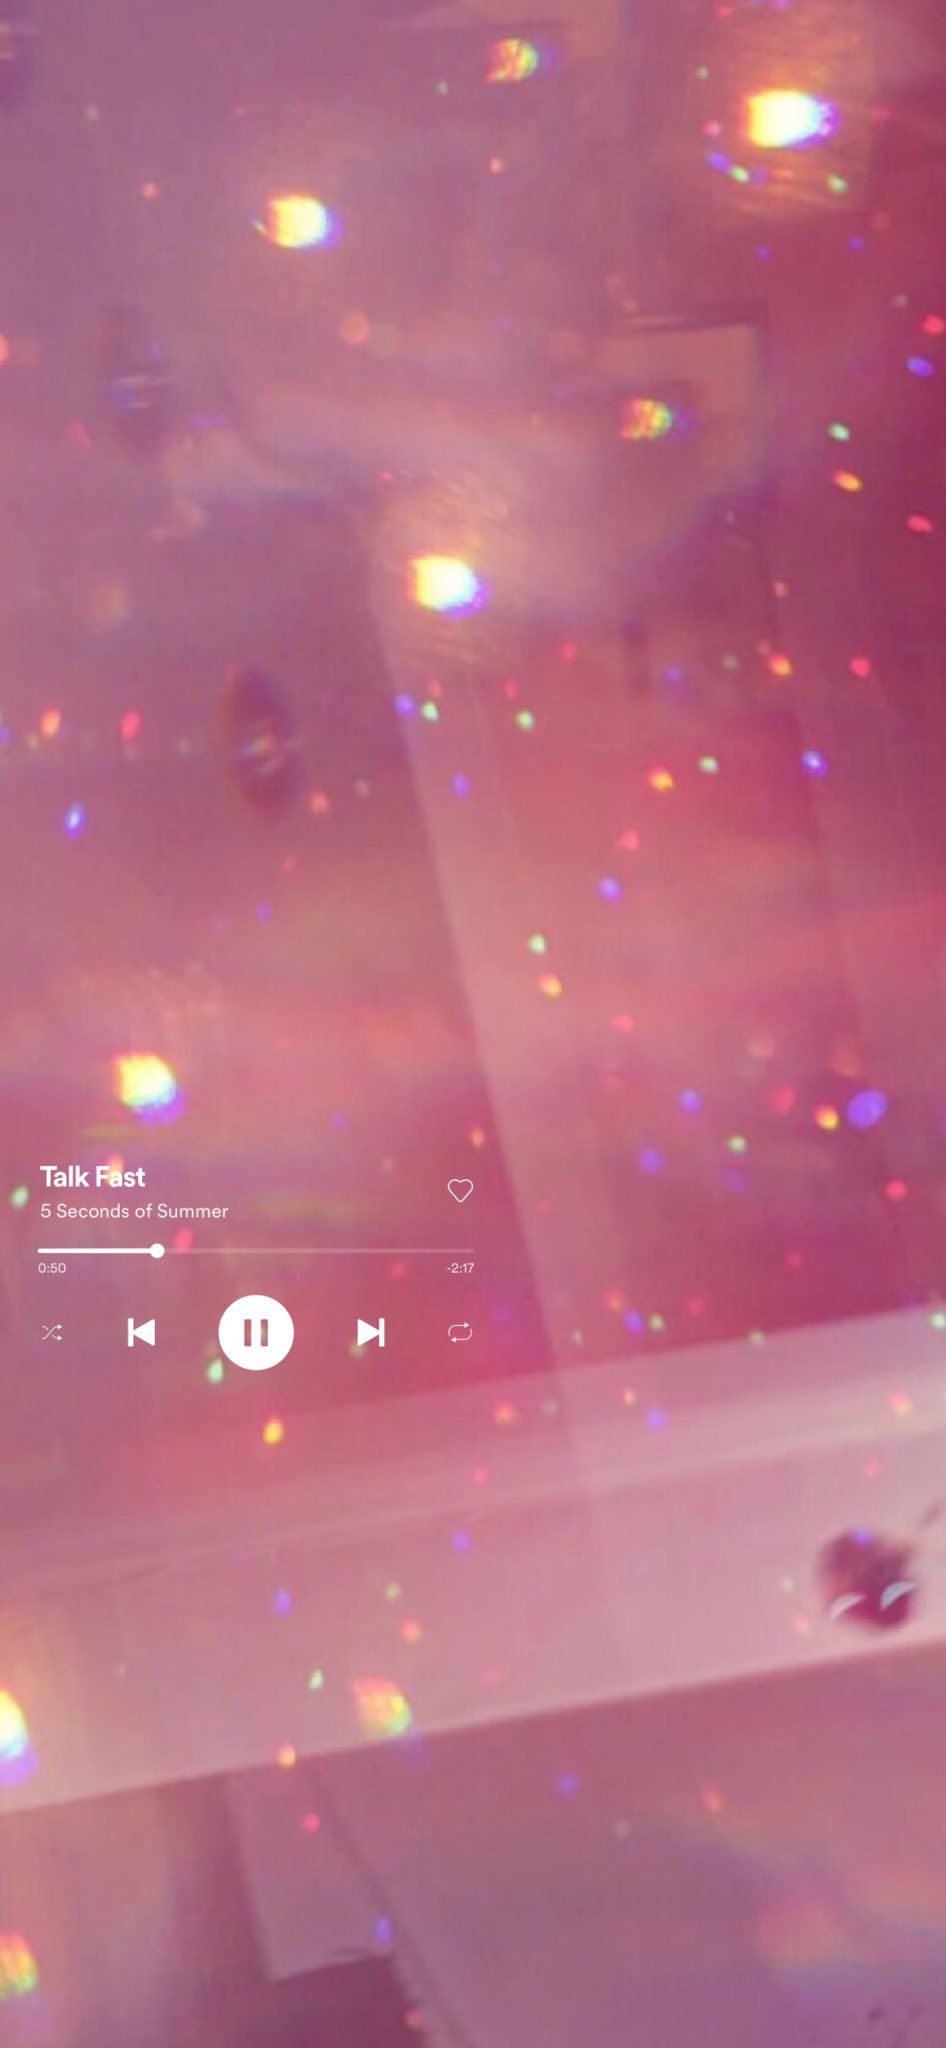 A screen shot of a pink background with rainbow light reflections and a music player in the bottom left corner. - Spotify